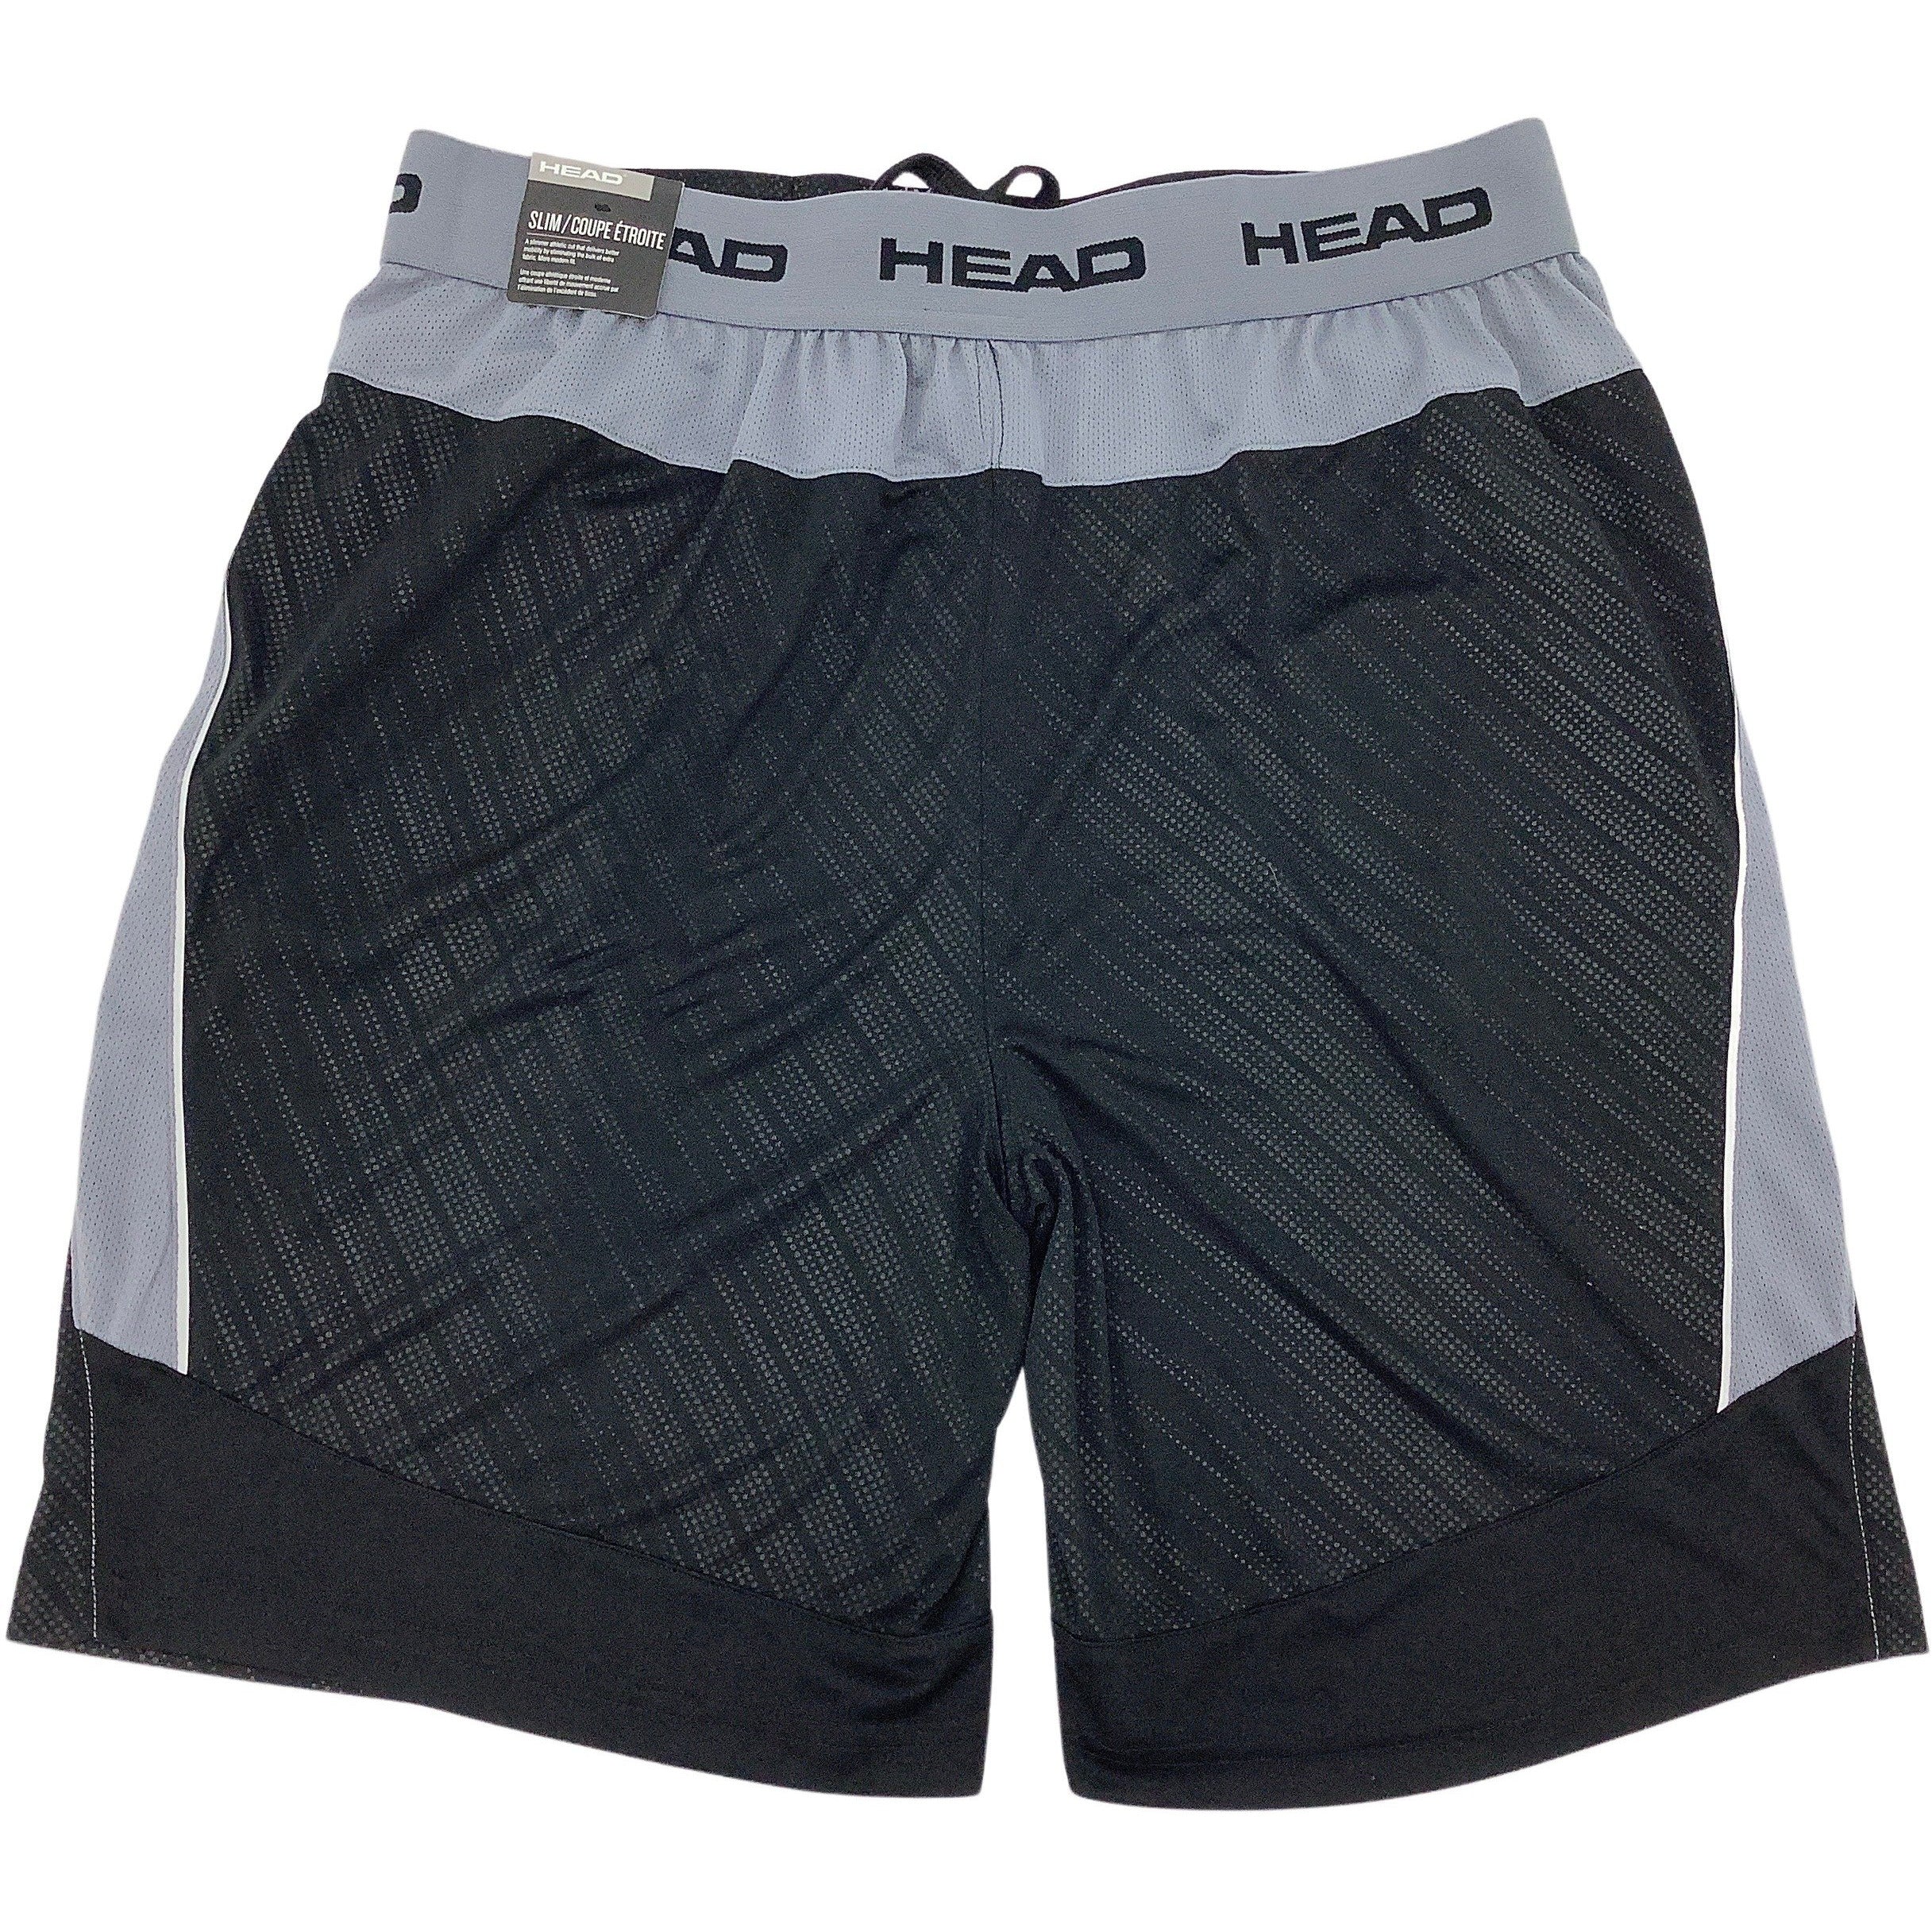 Head Men's Athletic Shorts: Grey and Black: Size L (no tags)